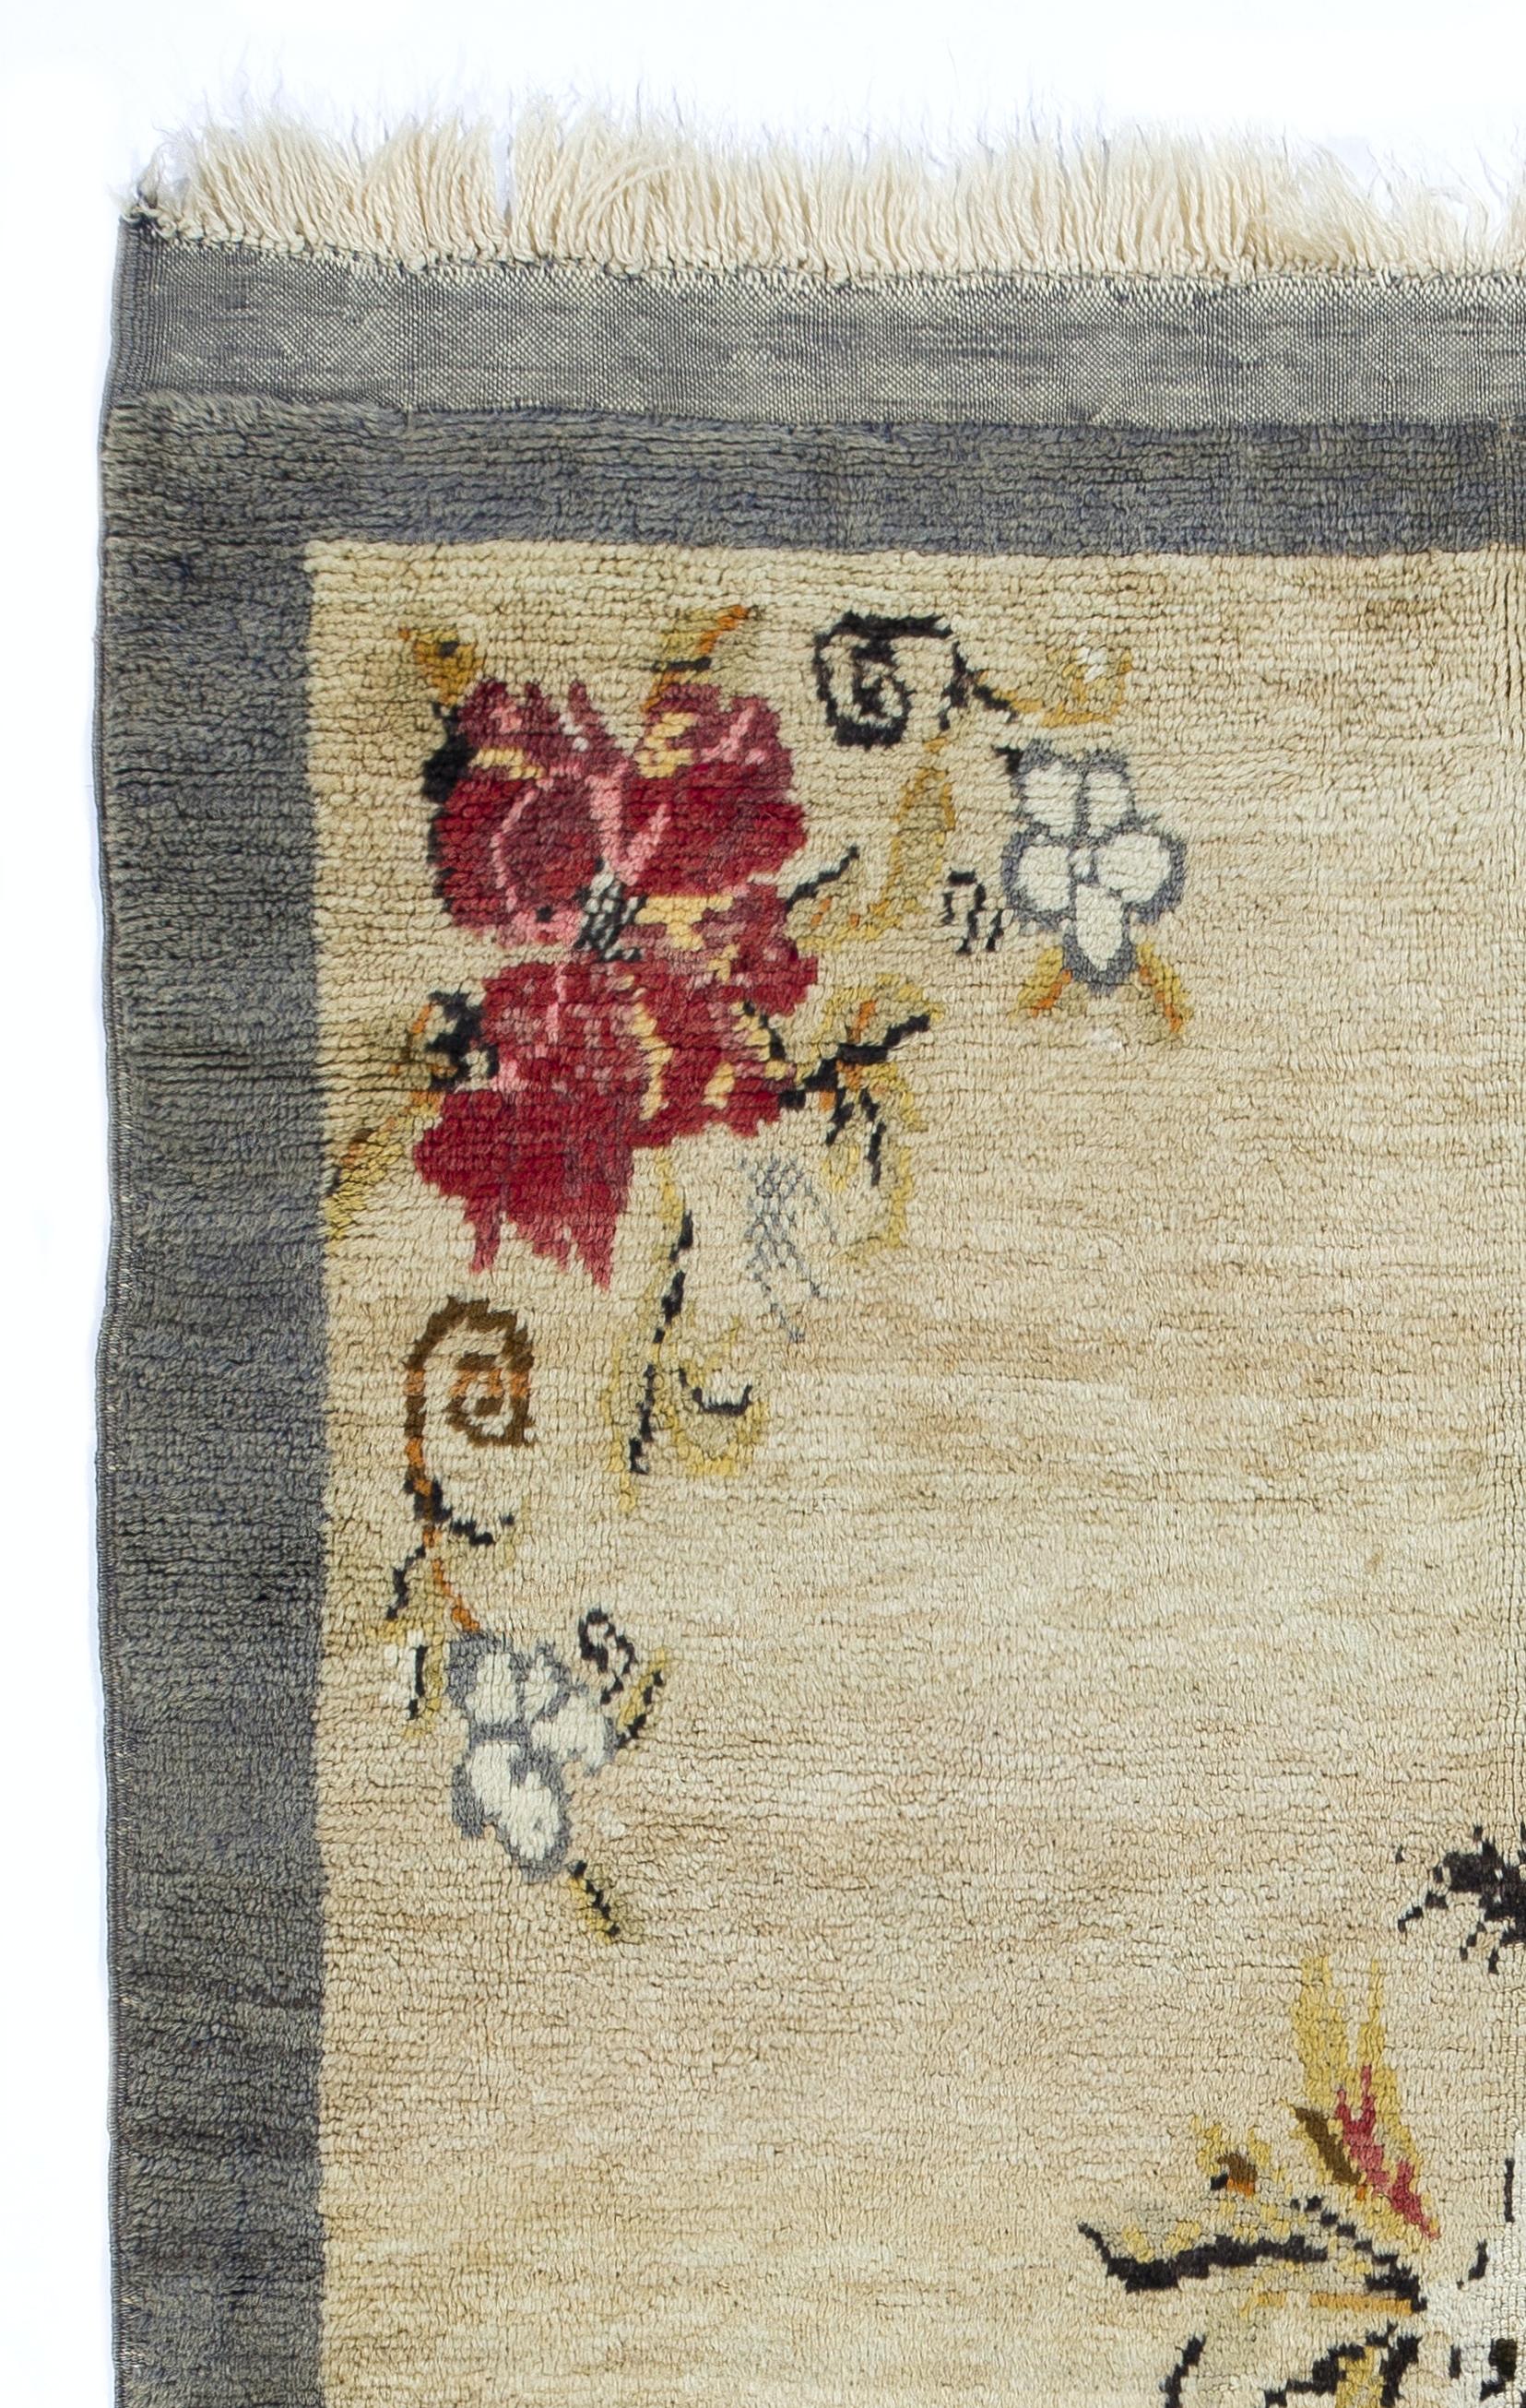 A vintage hand-knotted rug from Central Turkey, made of velvety lamb's wool, featuring large floral motifs in red, white, gray and tawny brown at its center and corners, against a plain, ivory background and a solid border in gray.

The rug was